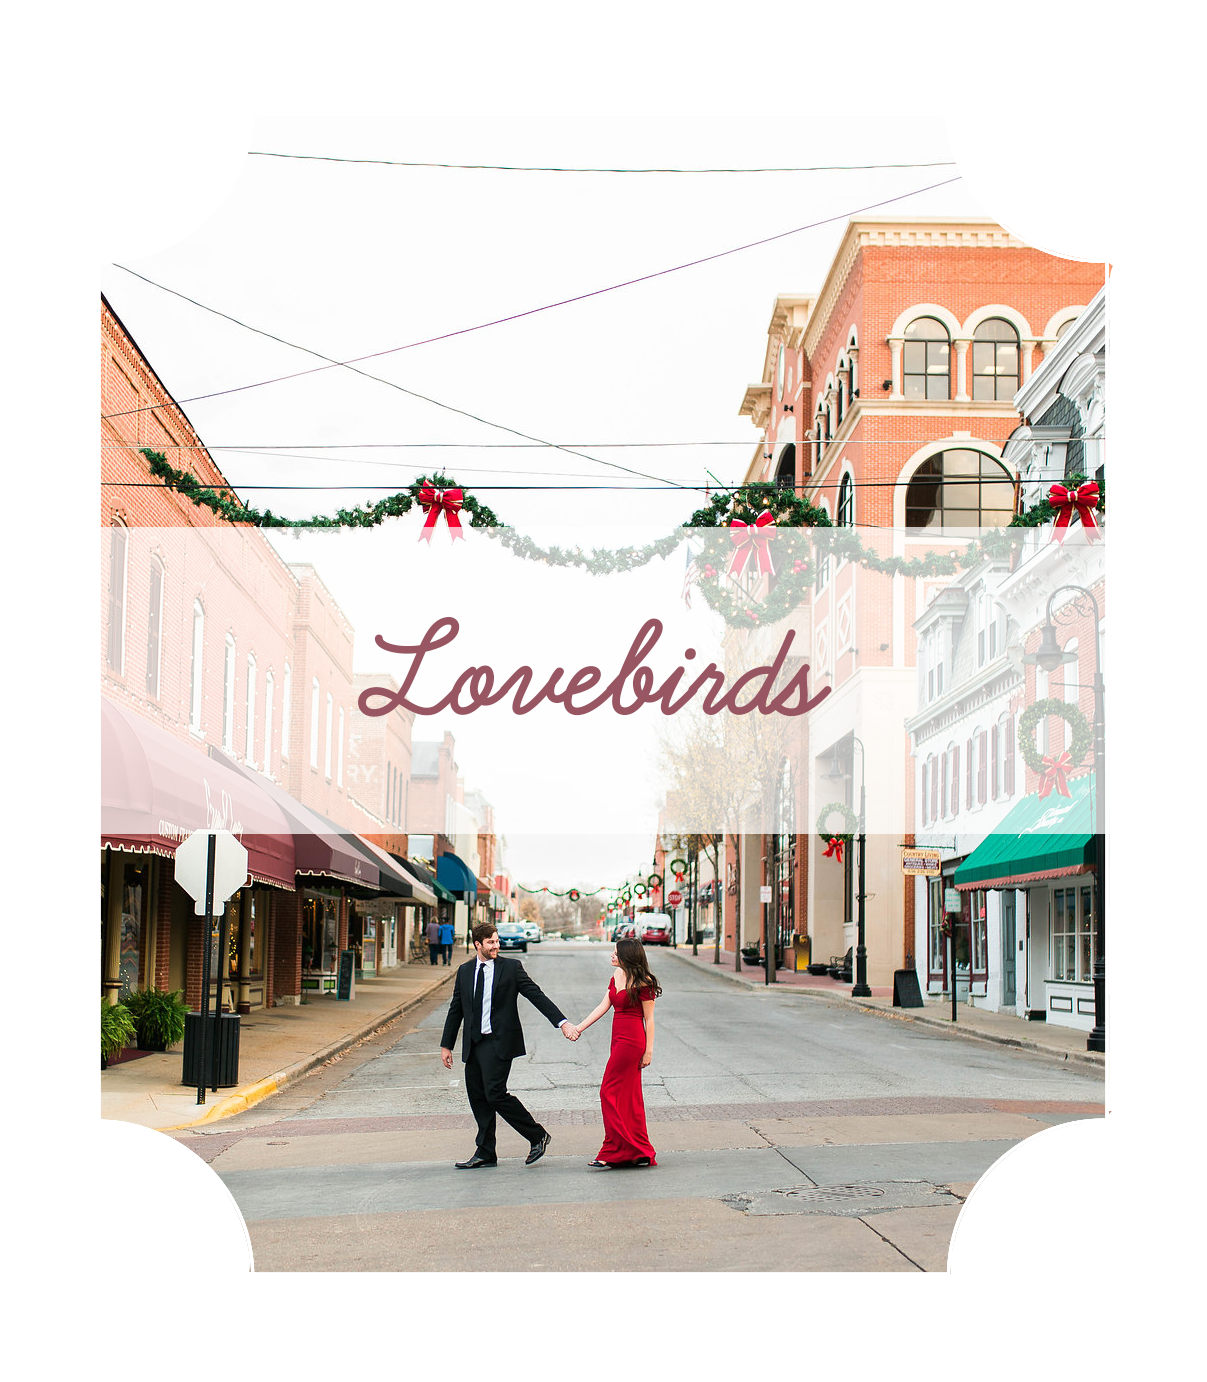 a couple, a woman in a long red dress, and a man in a suit, walking across a street with Christmas decorations all around